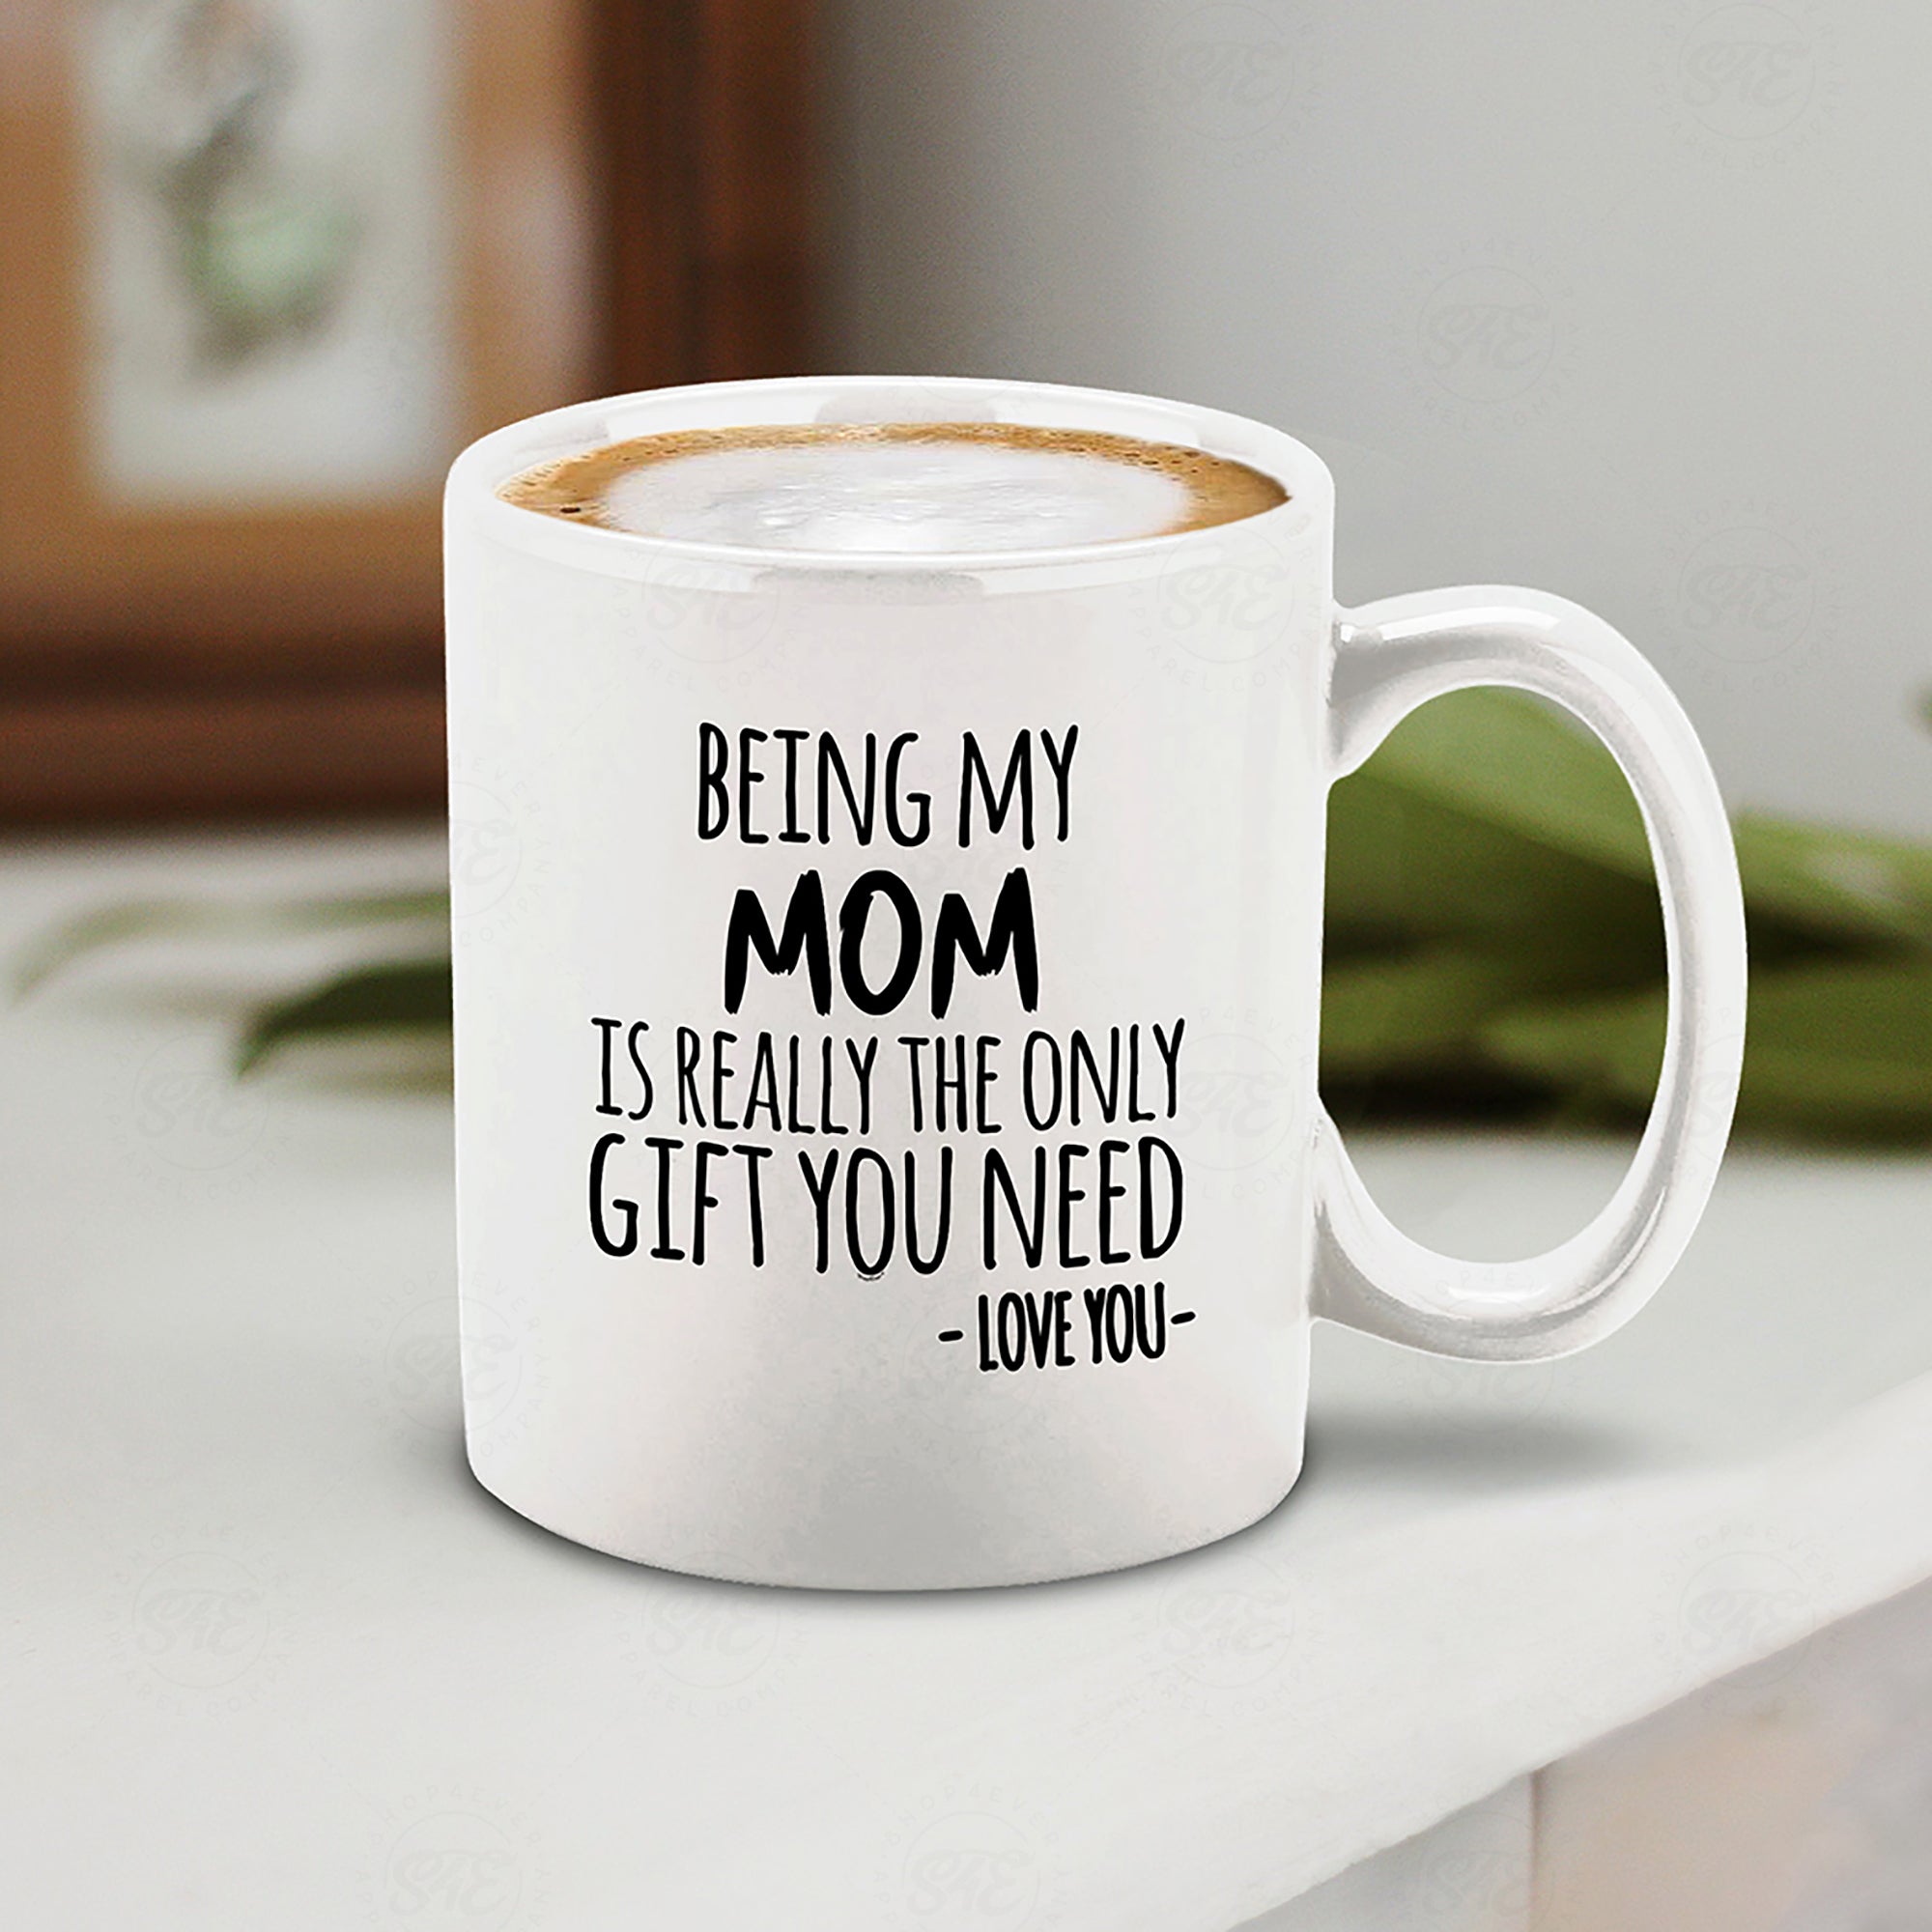 Funny Mom Coffee Mug from Daughter Son Being My Mom Is Really The Only Gift You Need Ceramic Coffee Mug (Mom)